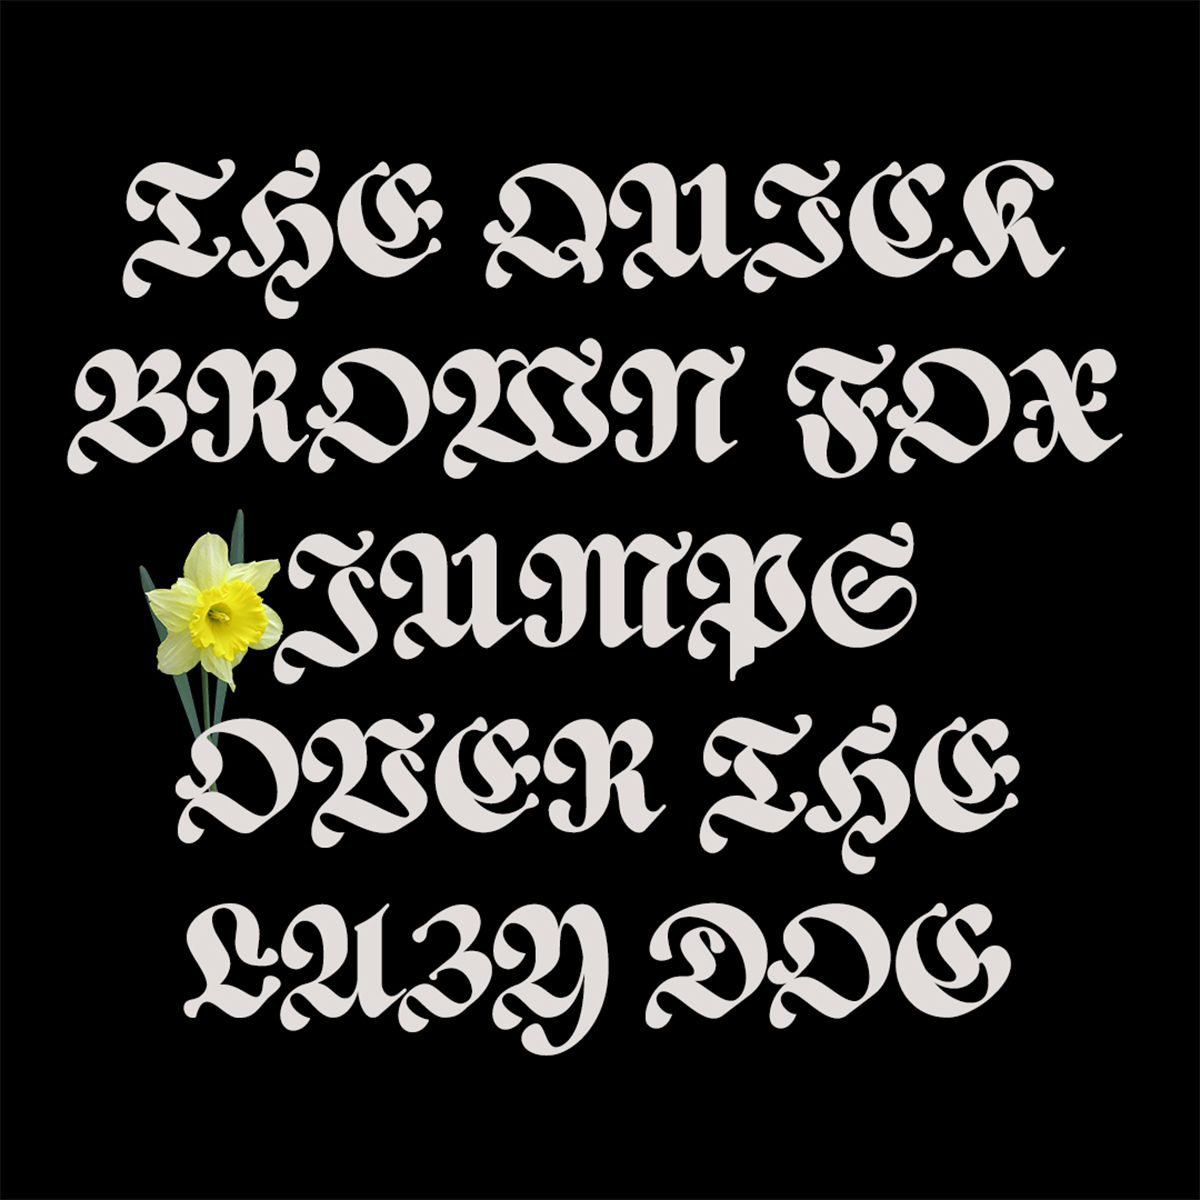 ED Daffodil, a new blackletter-inspired font by Emyself Design, now available on Type Department.